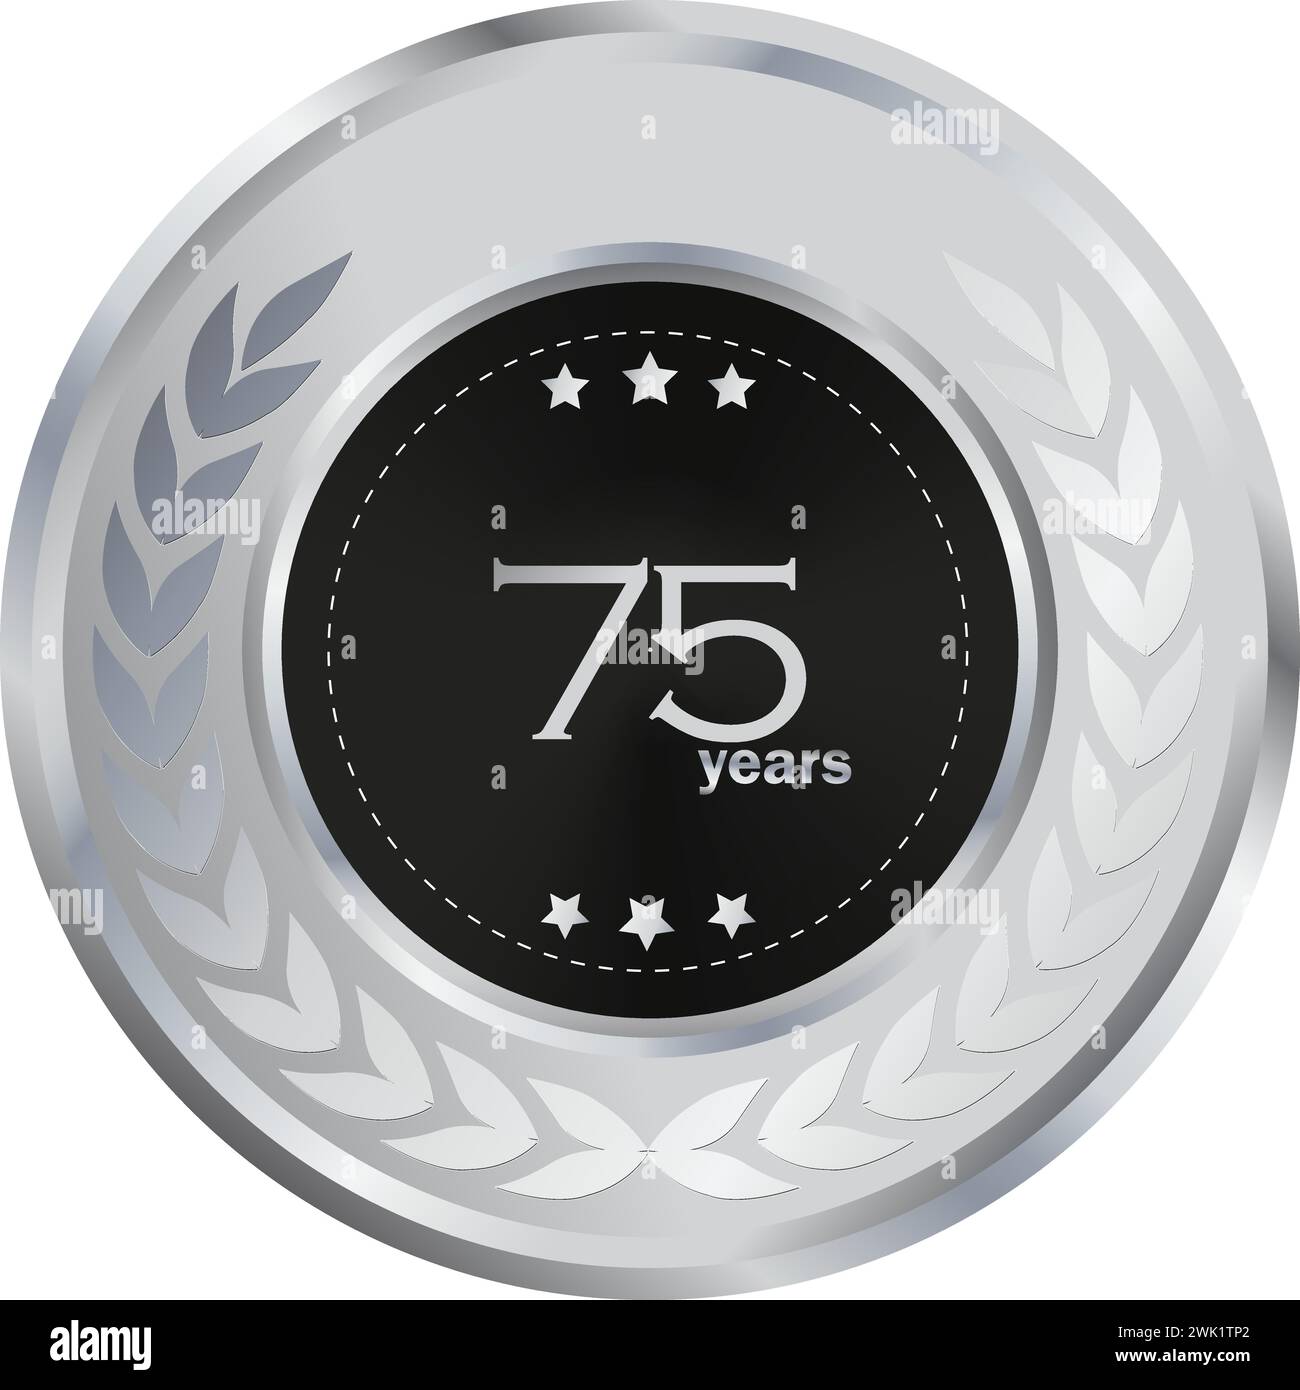 75th anniversary in Silver and Black, anniversary gift, 75th Year Anniversary Celebrating, Silver seal, Silver ring, birthday celebration Stock Vector